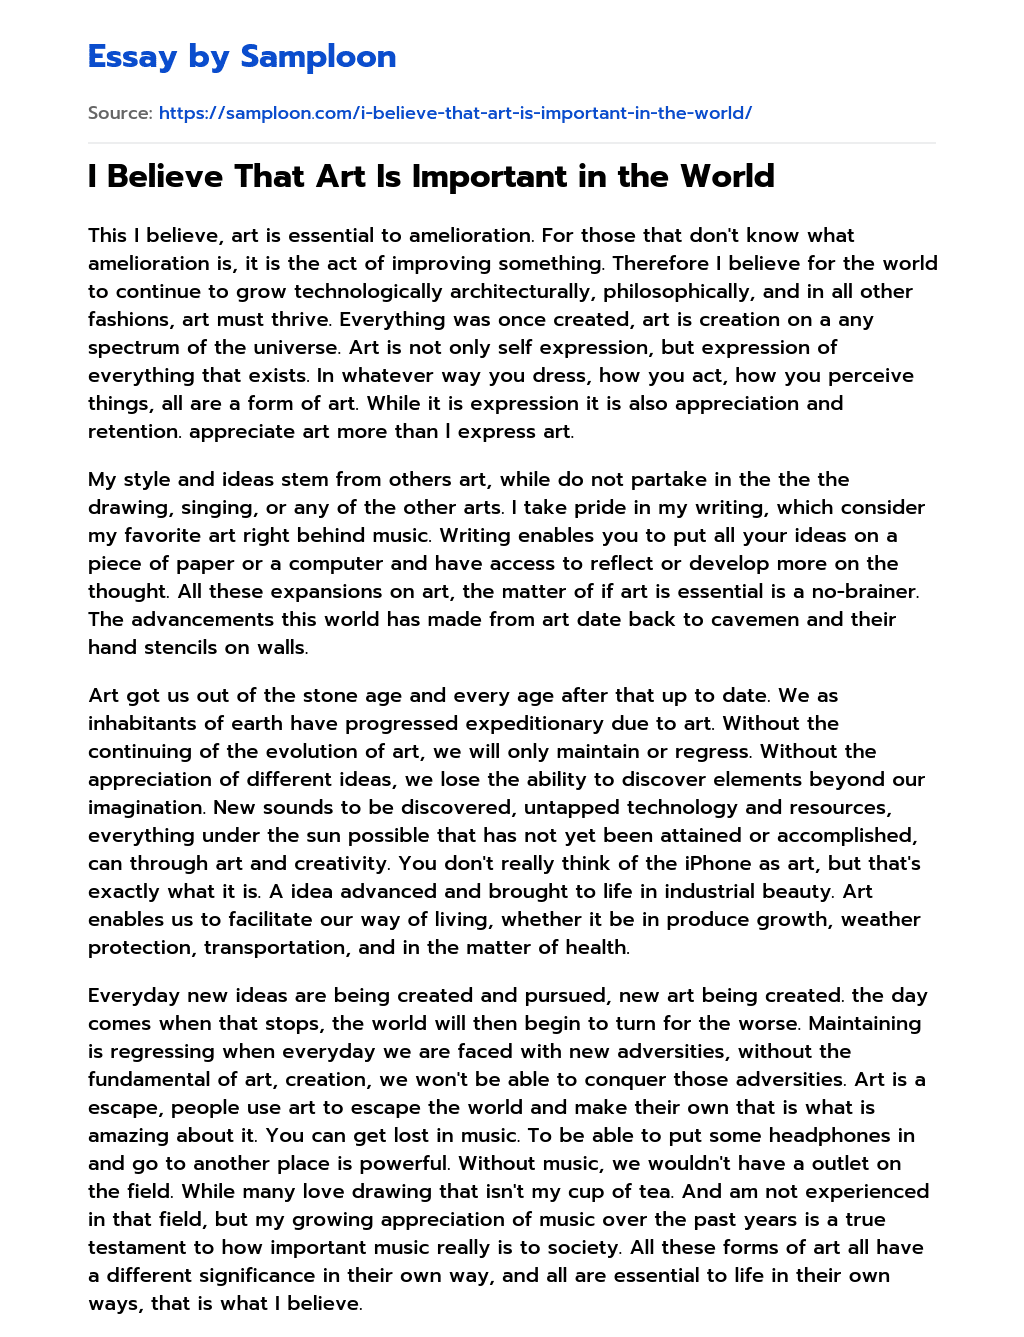 I Believe That Art Is Important in the World essay